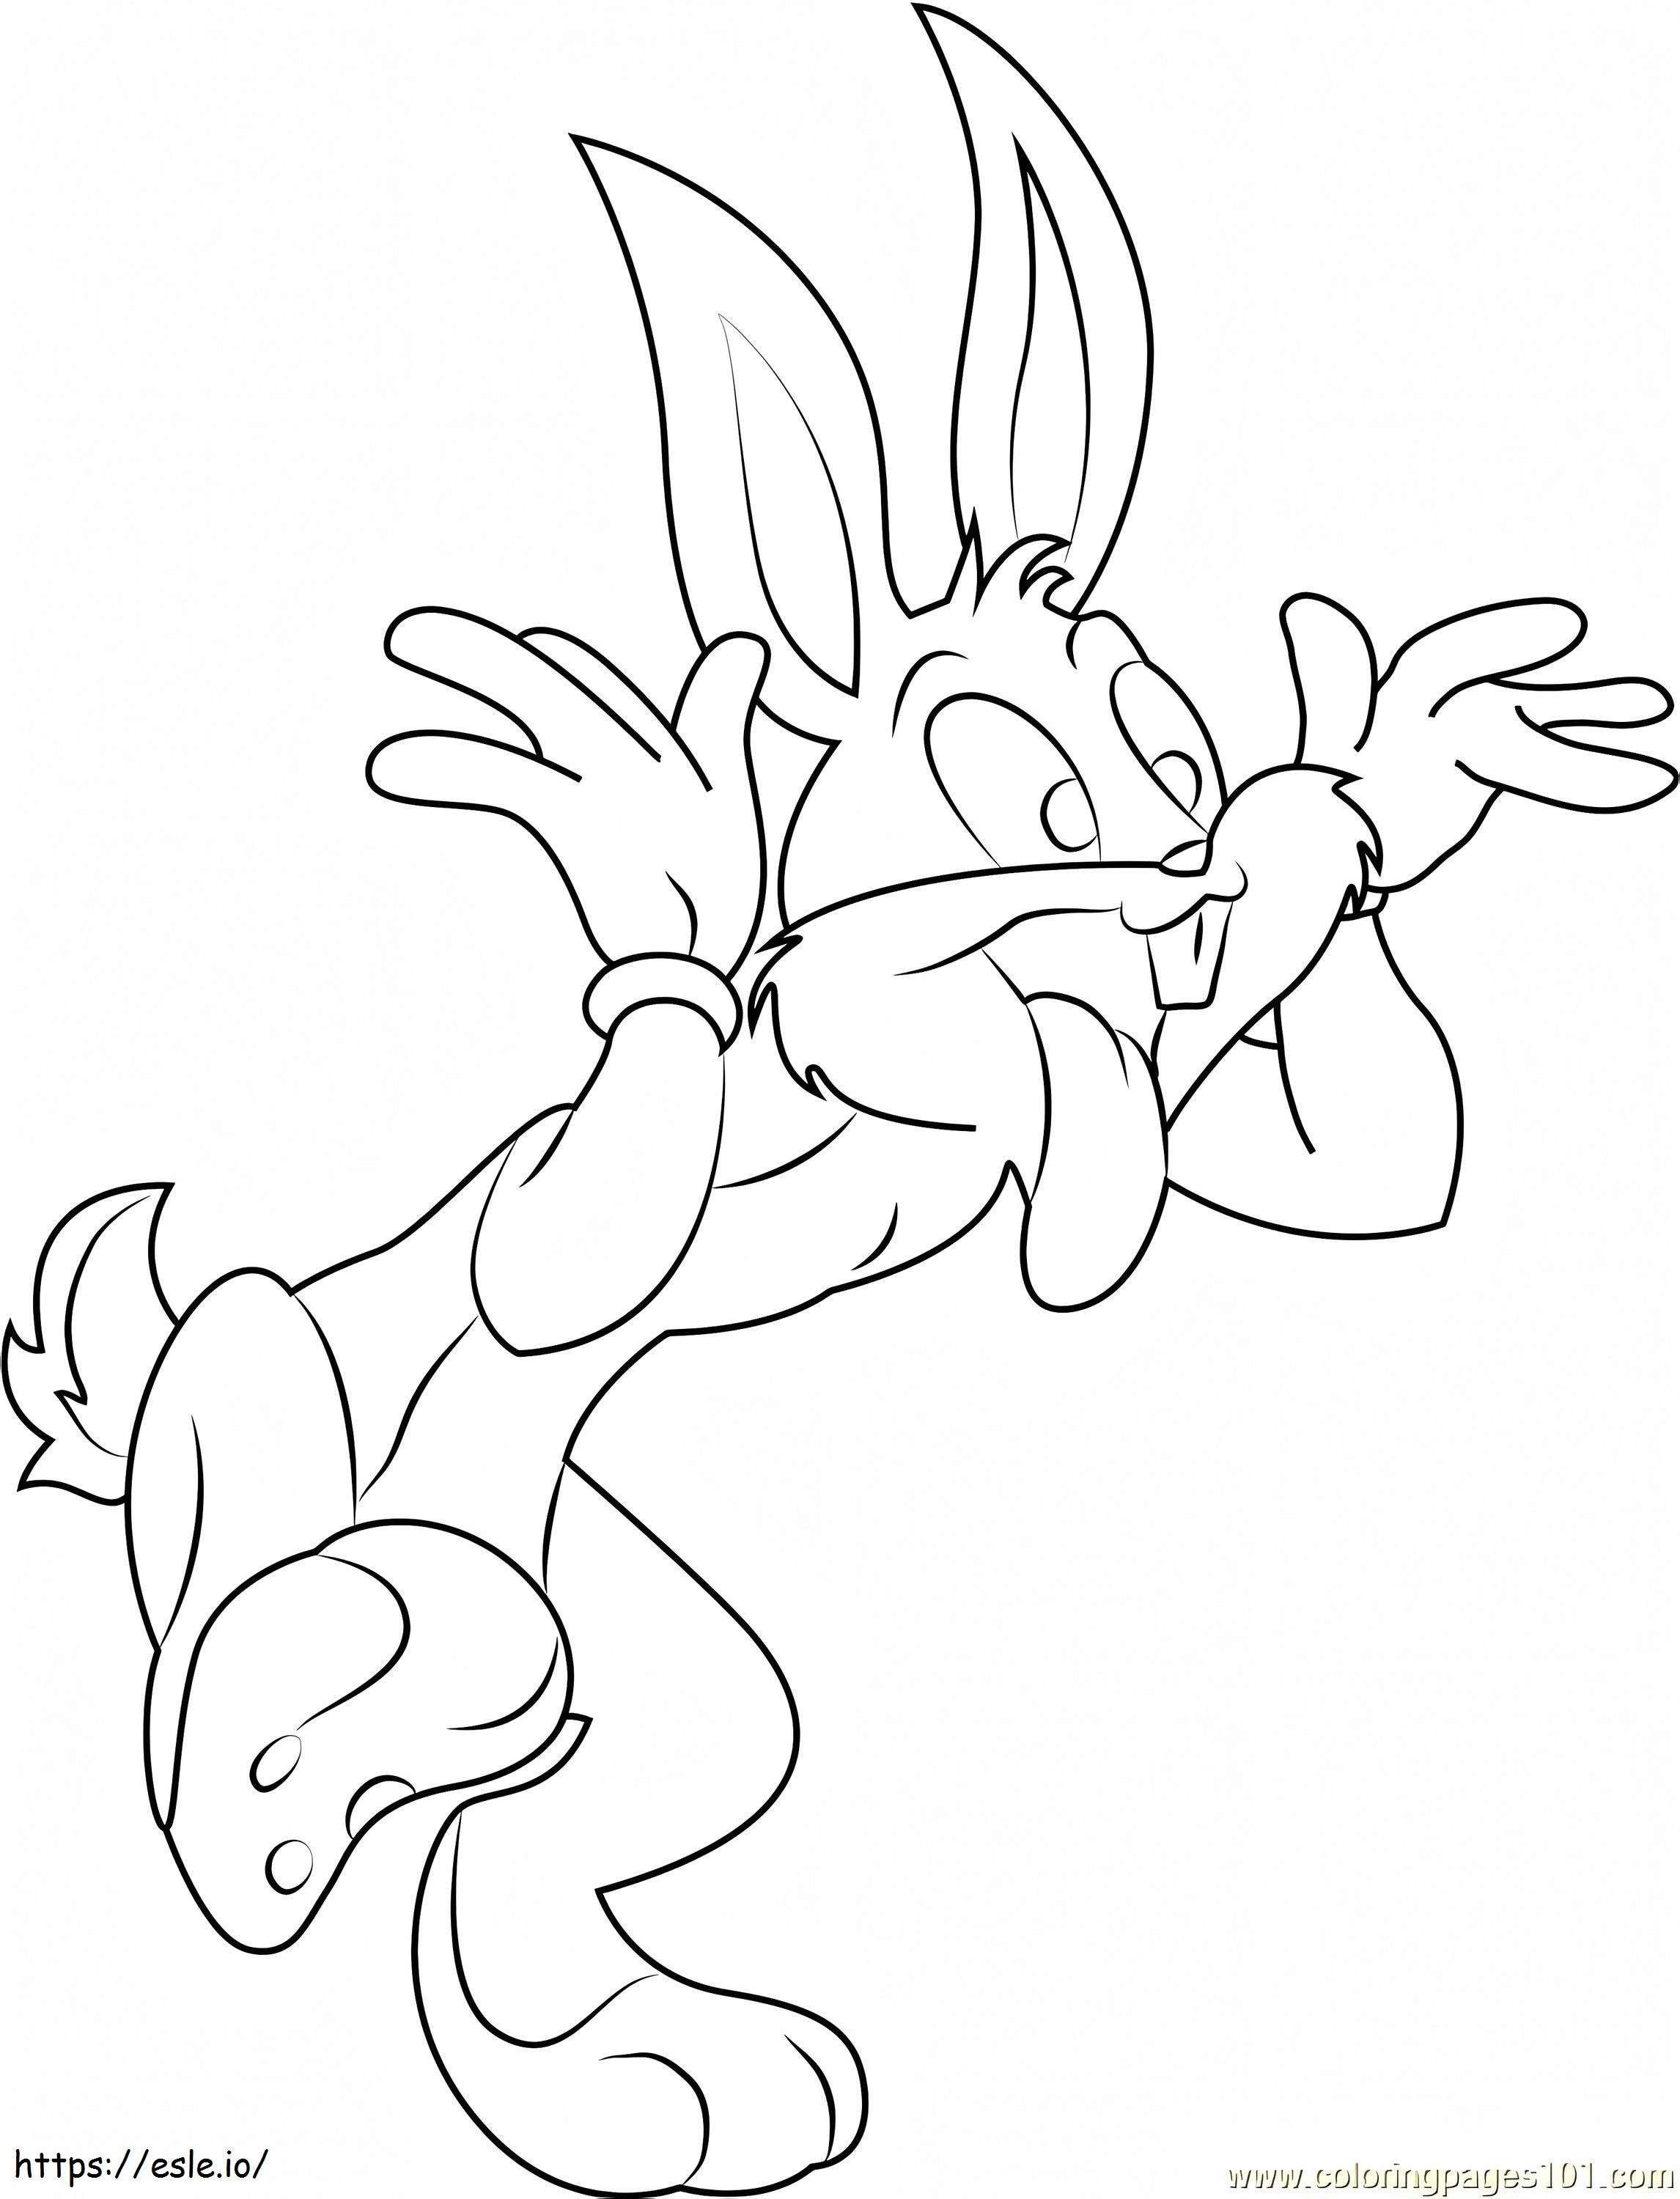 1530324261_Bugs Bunny Rabbit1 coloring page